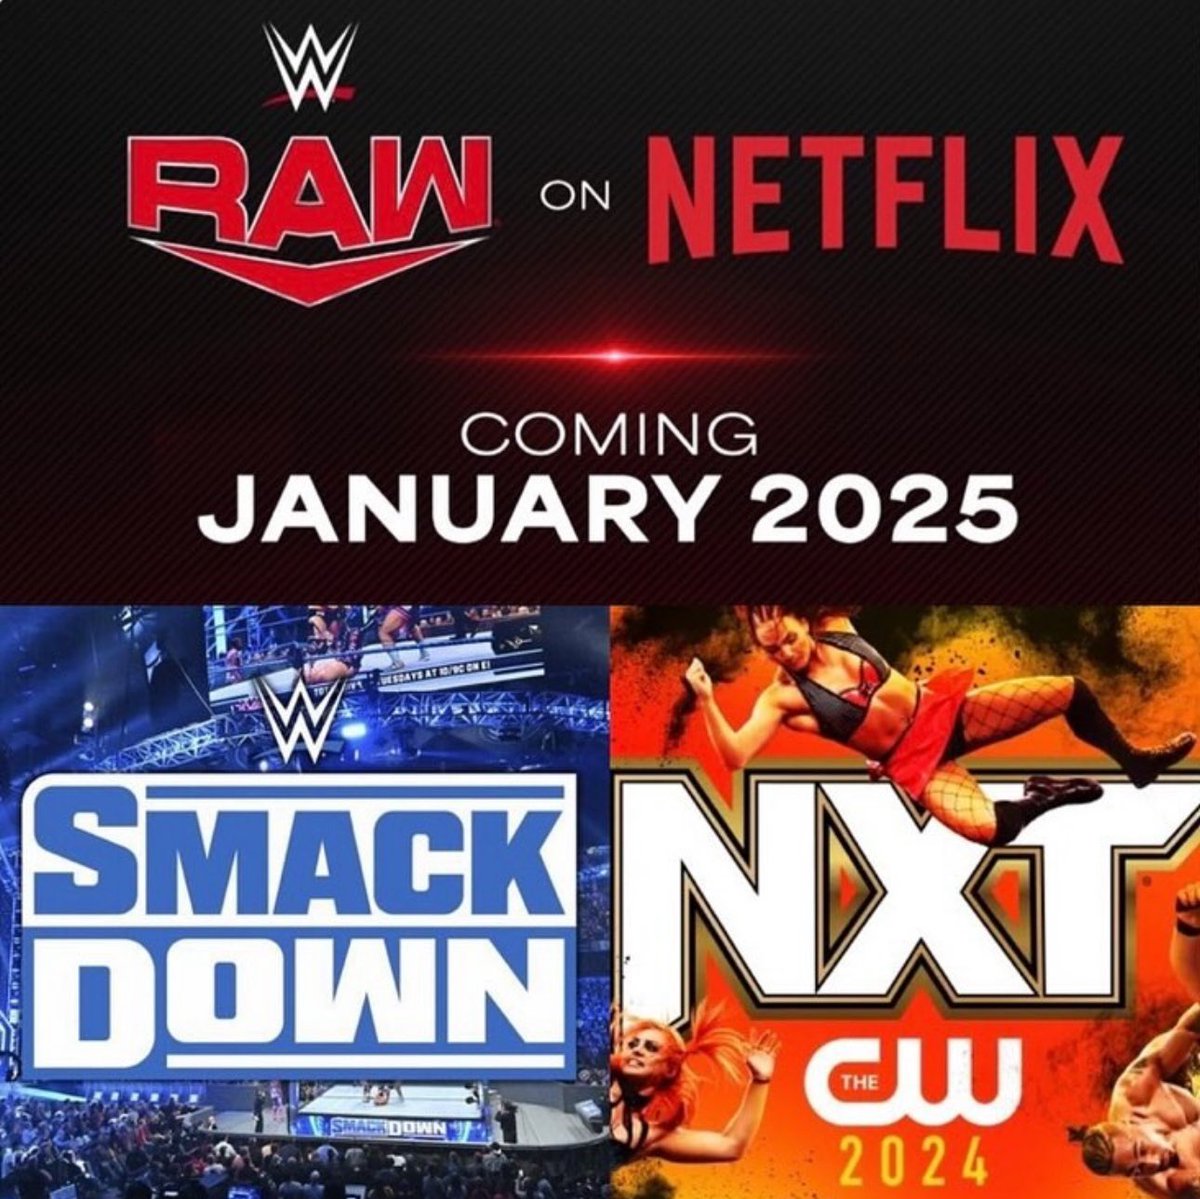 All 3 of WWE’s shows are officially confirmed to remain on the same days once they’ve moved to their respective homes: Monday: #WWERAW on Netflix (Jan 2025) Tuesday: #WWENXT on The CW (Oct 2024) Friday: #SmackDown on USA (Sep 2024)